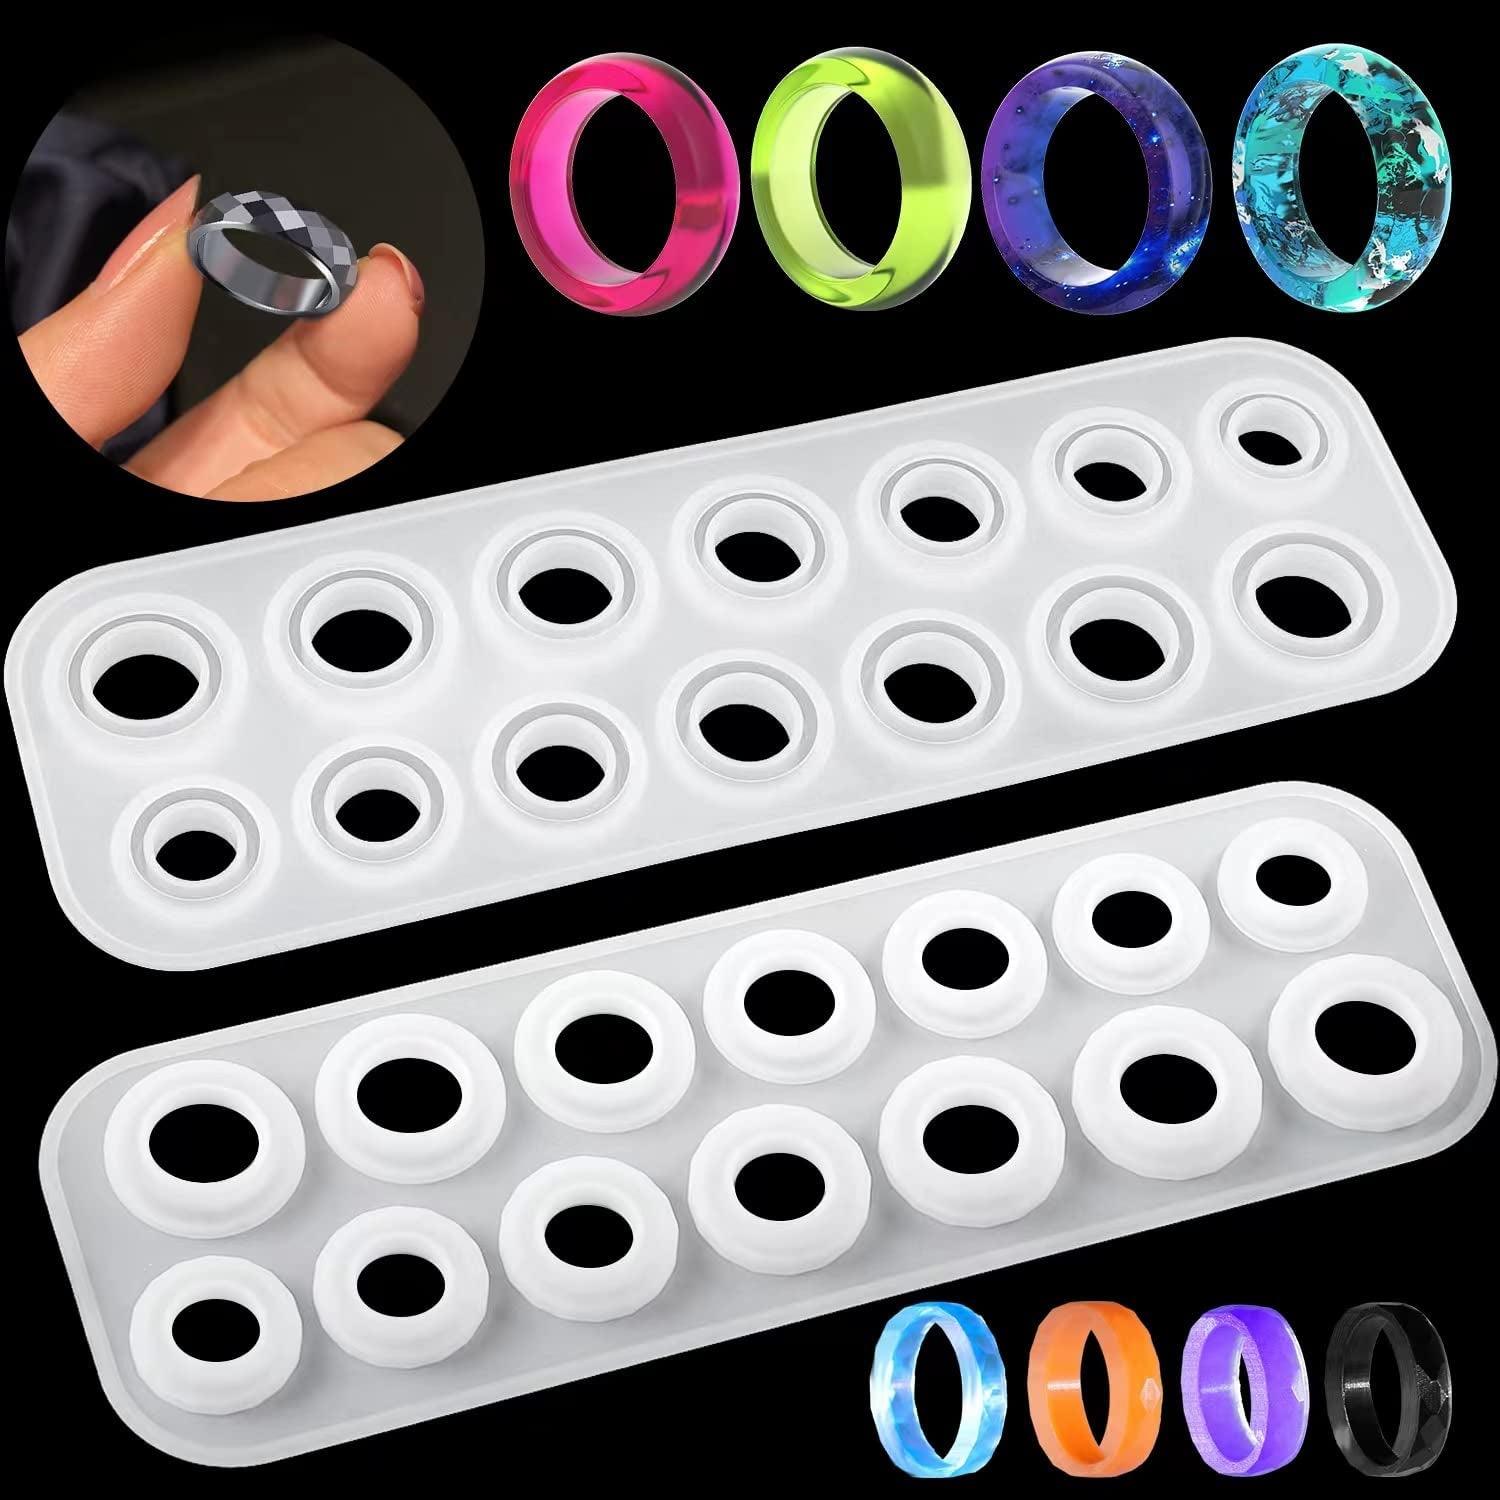 Senweit Premium Resin Ring Mold, Silicone Molds for Epoxy Resin, Resin Molds with 14 Different Sizes, for Making Rings, Earrings, Pendants, Crafts